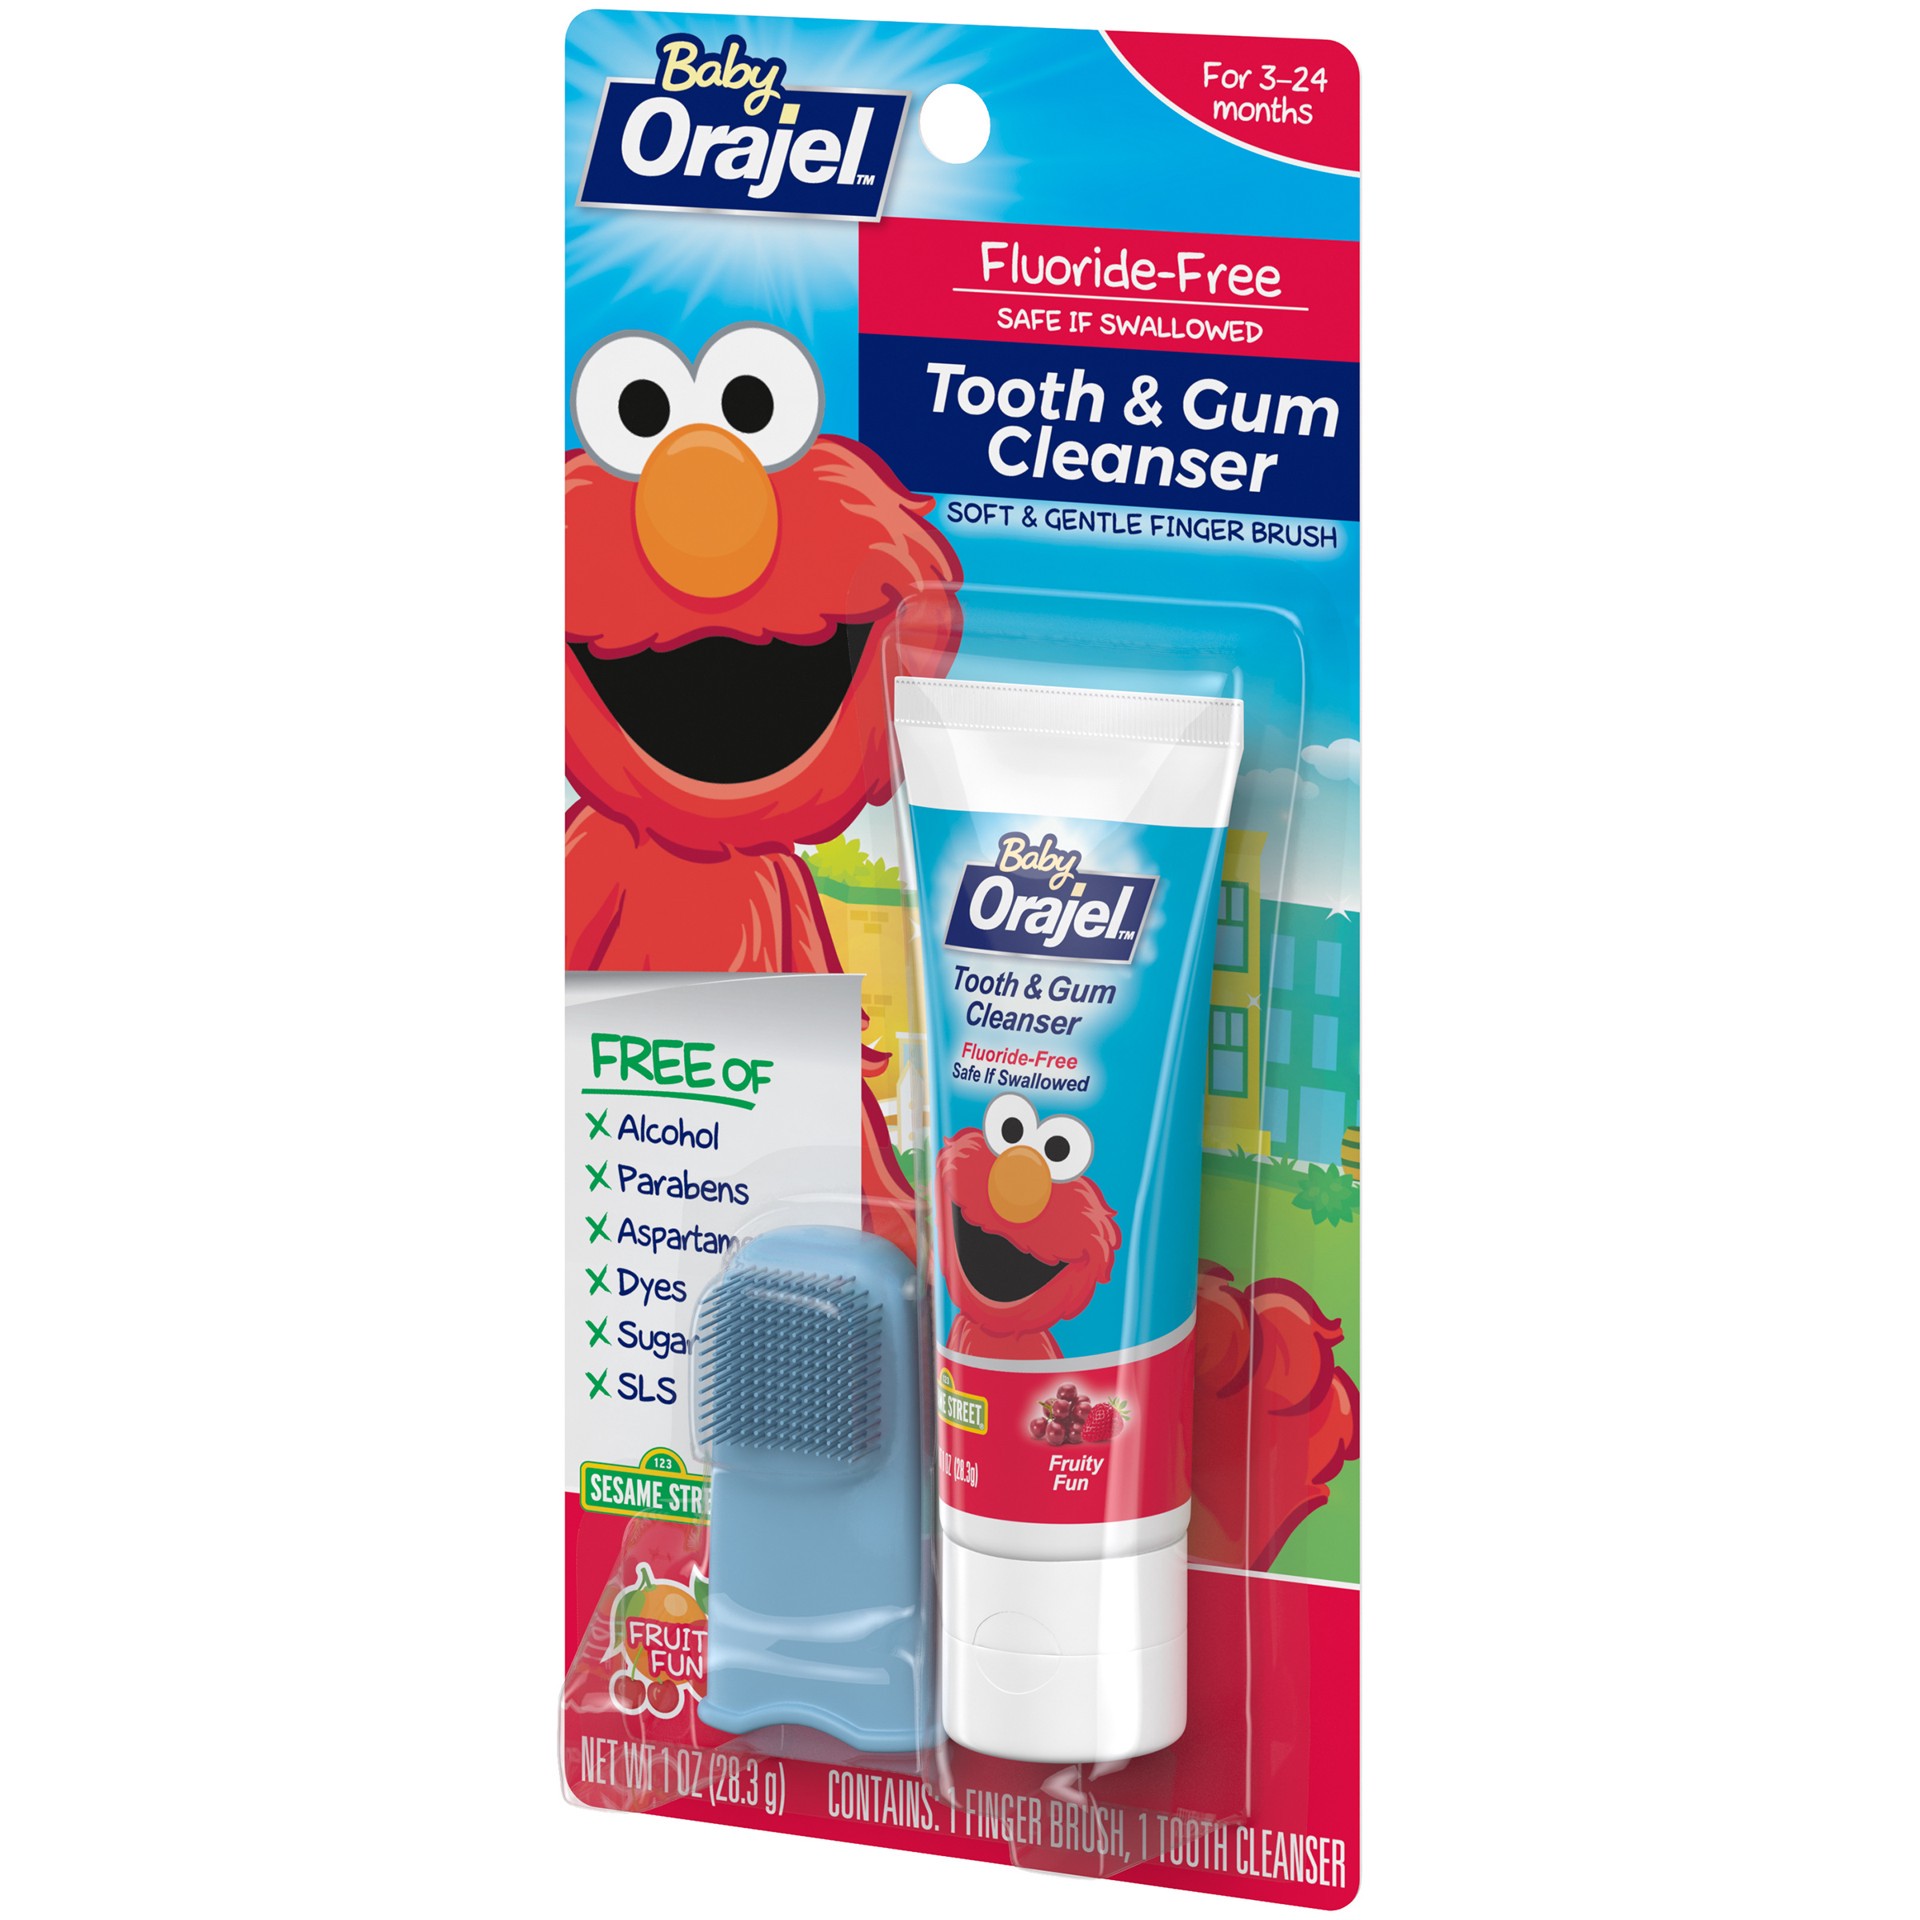 slide 2 of 4, Orajel Elmo Fluoride-Free Tooth & Gum Cleanser with Finger Brush, Combo Pack, Fruity Fun Flavored Non-Fluoride, 1.0 oz., 1 oz